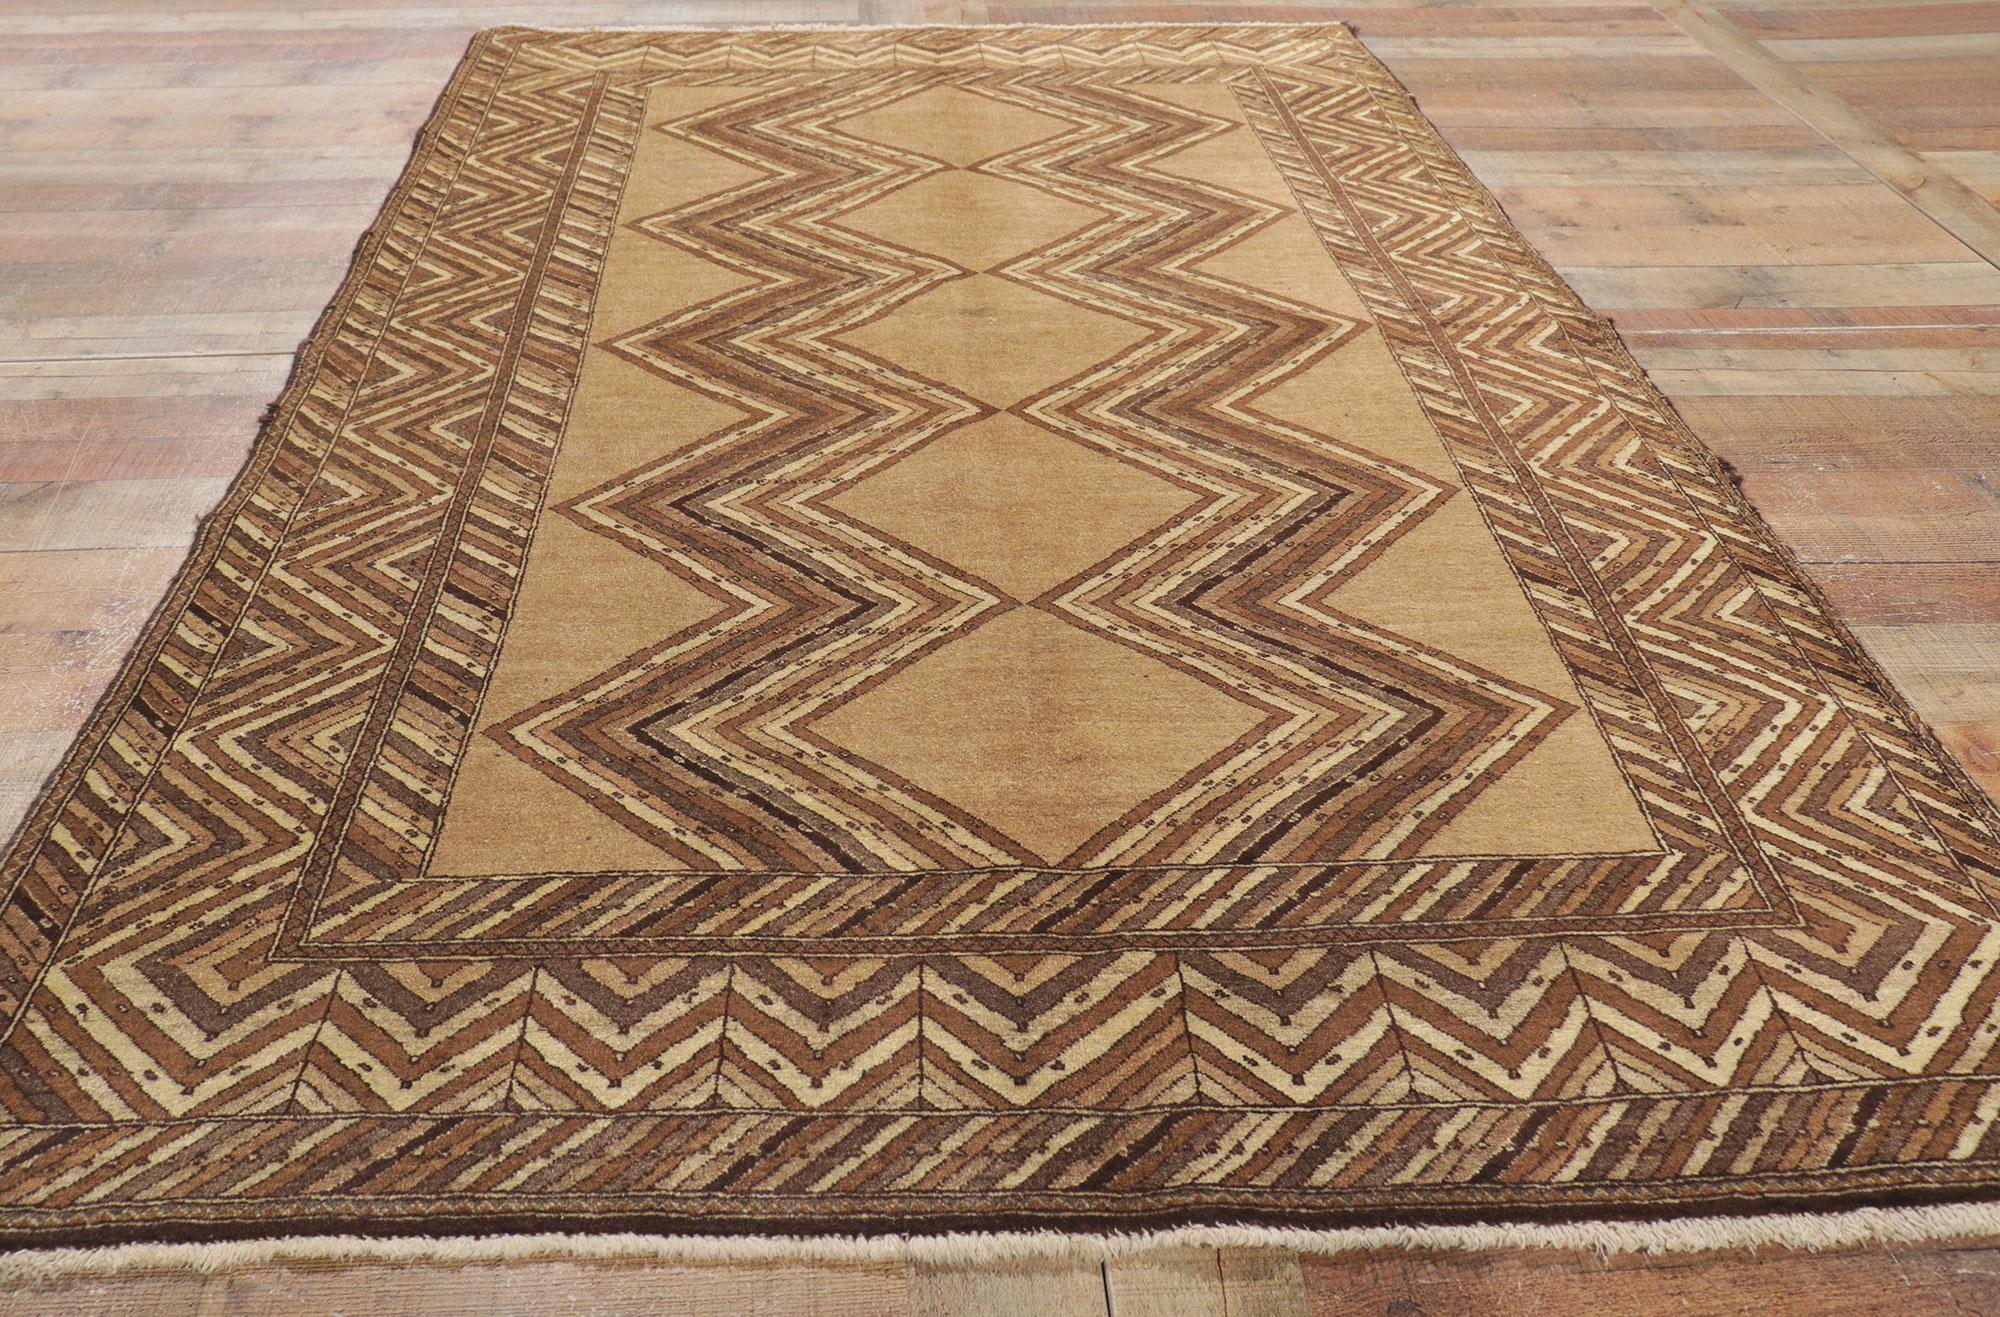 Vintage Persian Tribal Semnan Rug with Warm Earth-Tone Colors For Sale 1